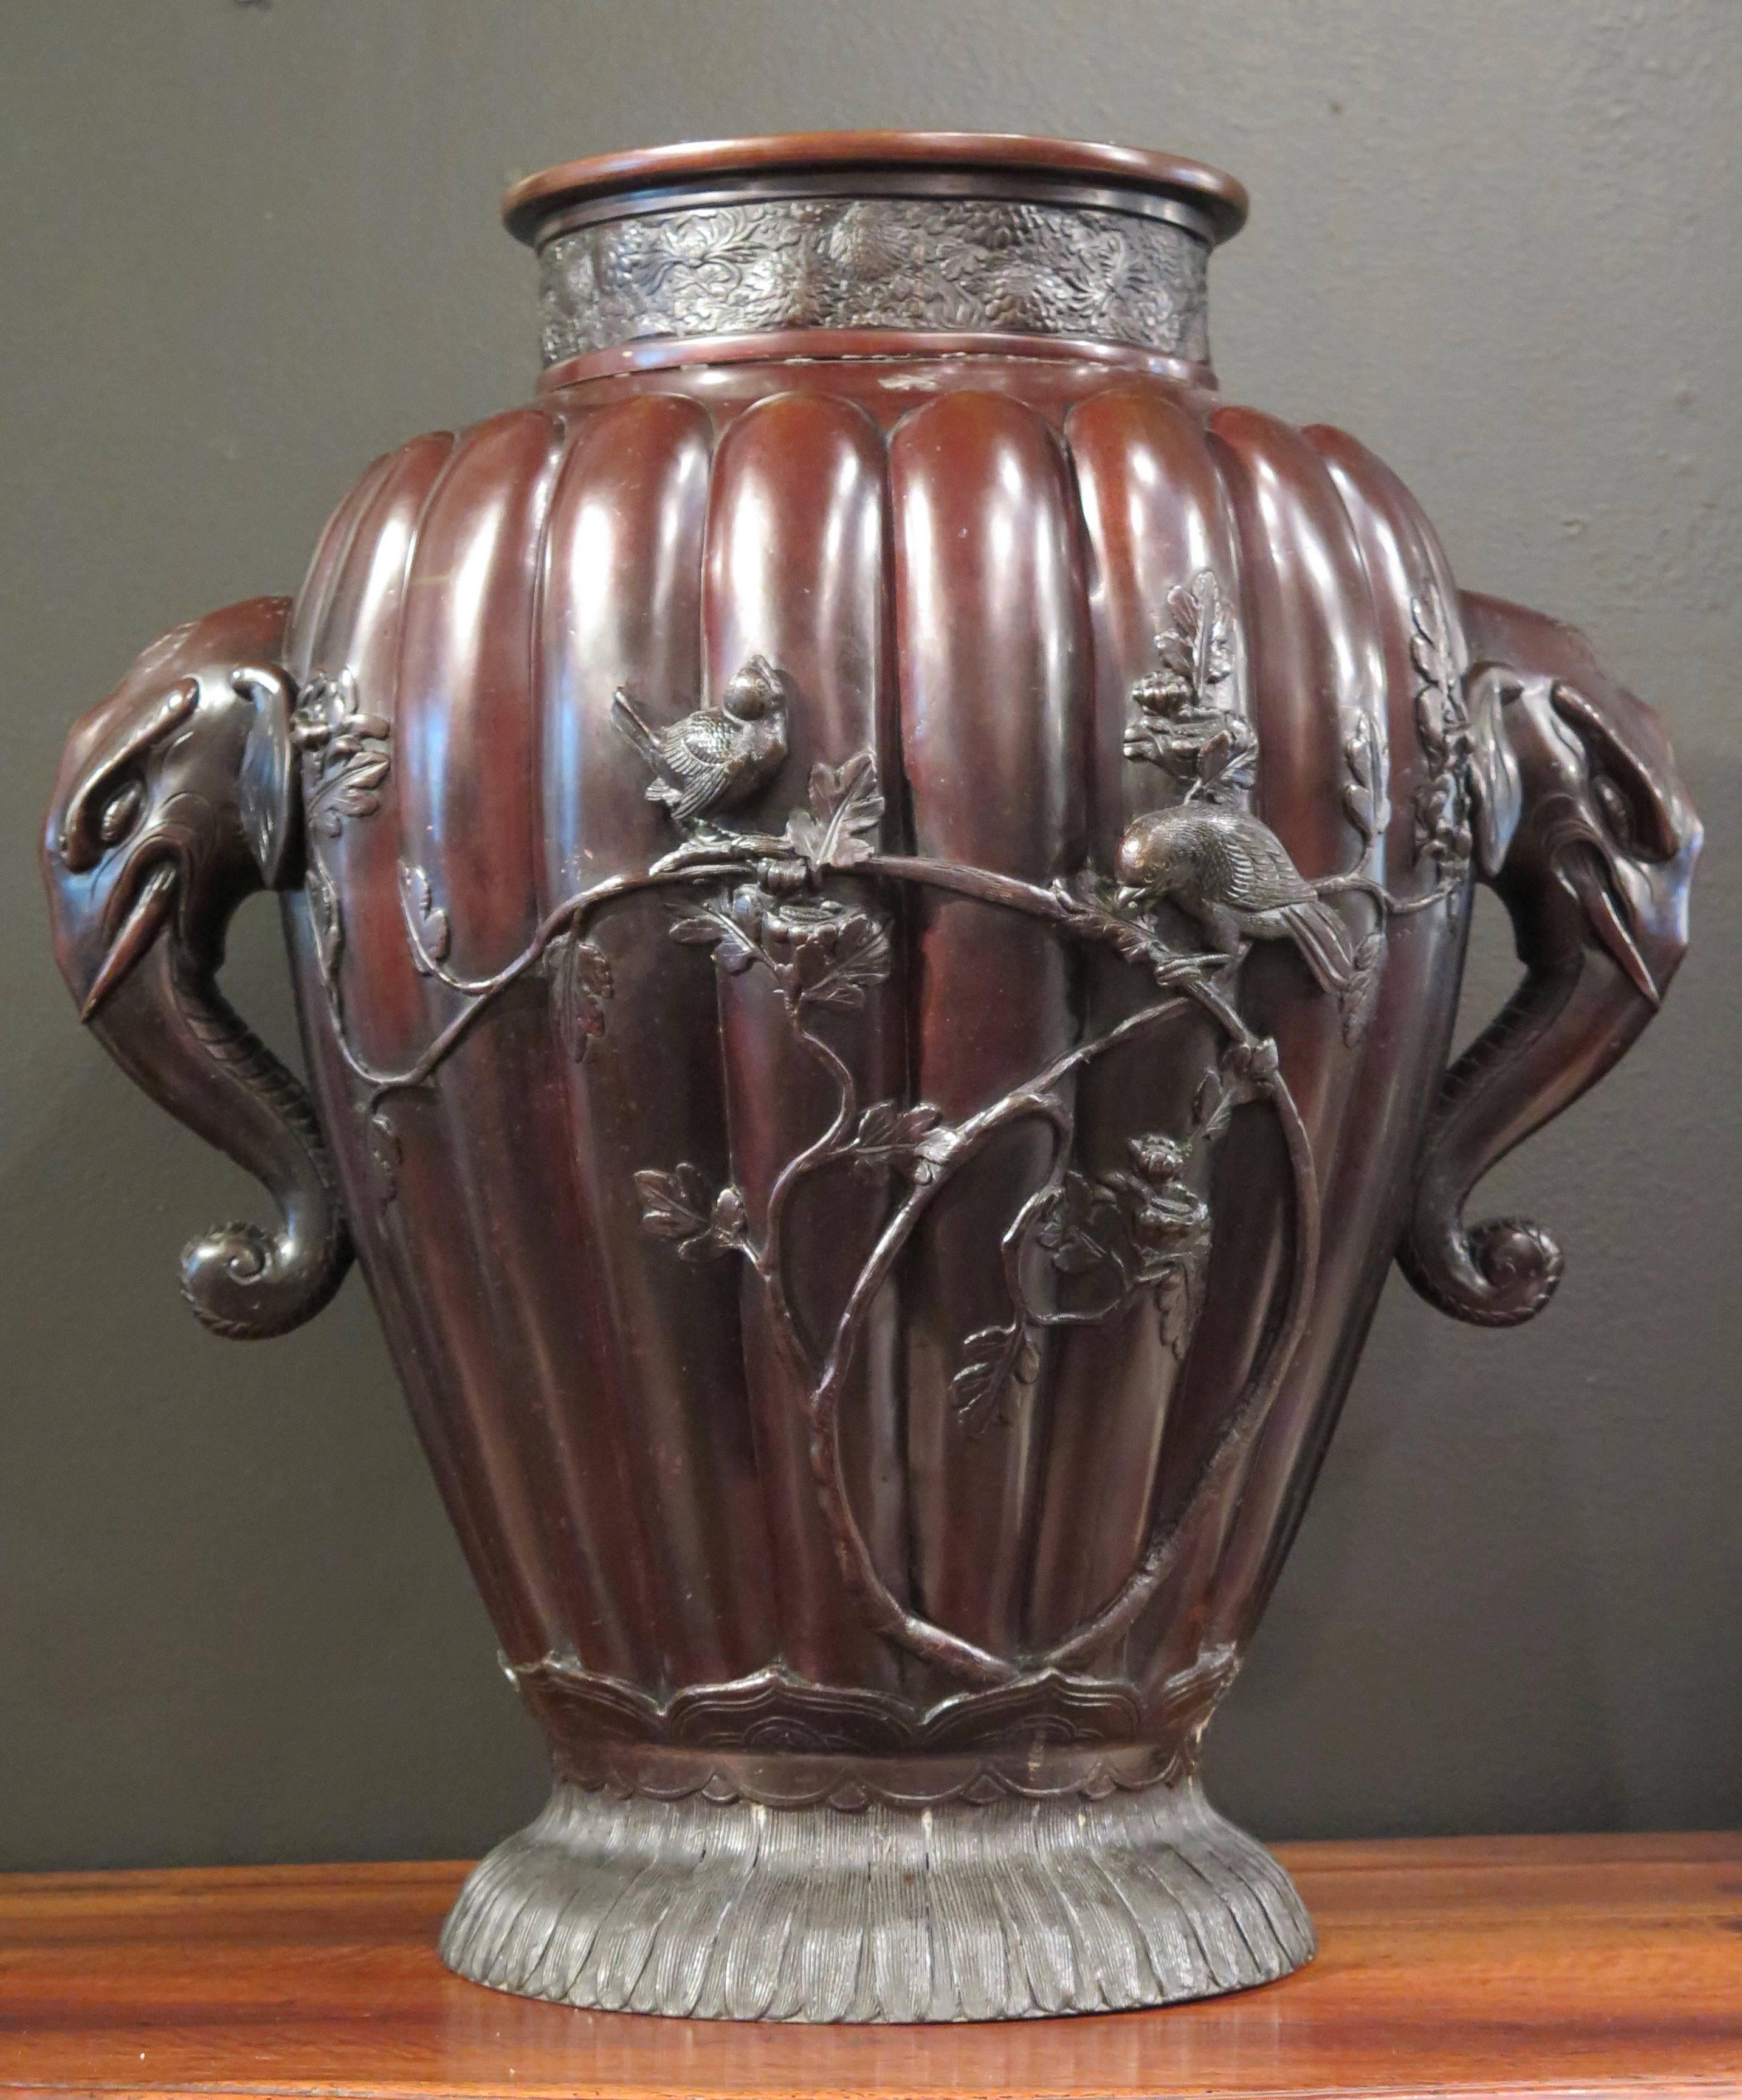 A very large Meiji period bronze vase, possibly for temple use, with high relief design and elephant head handles, late 19th century, Japan. 

Of baluster form and unusual size, yet still retaining elegant proportions, the lobed body rising from a